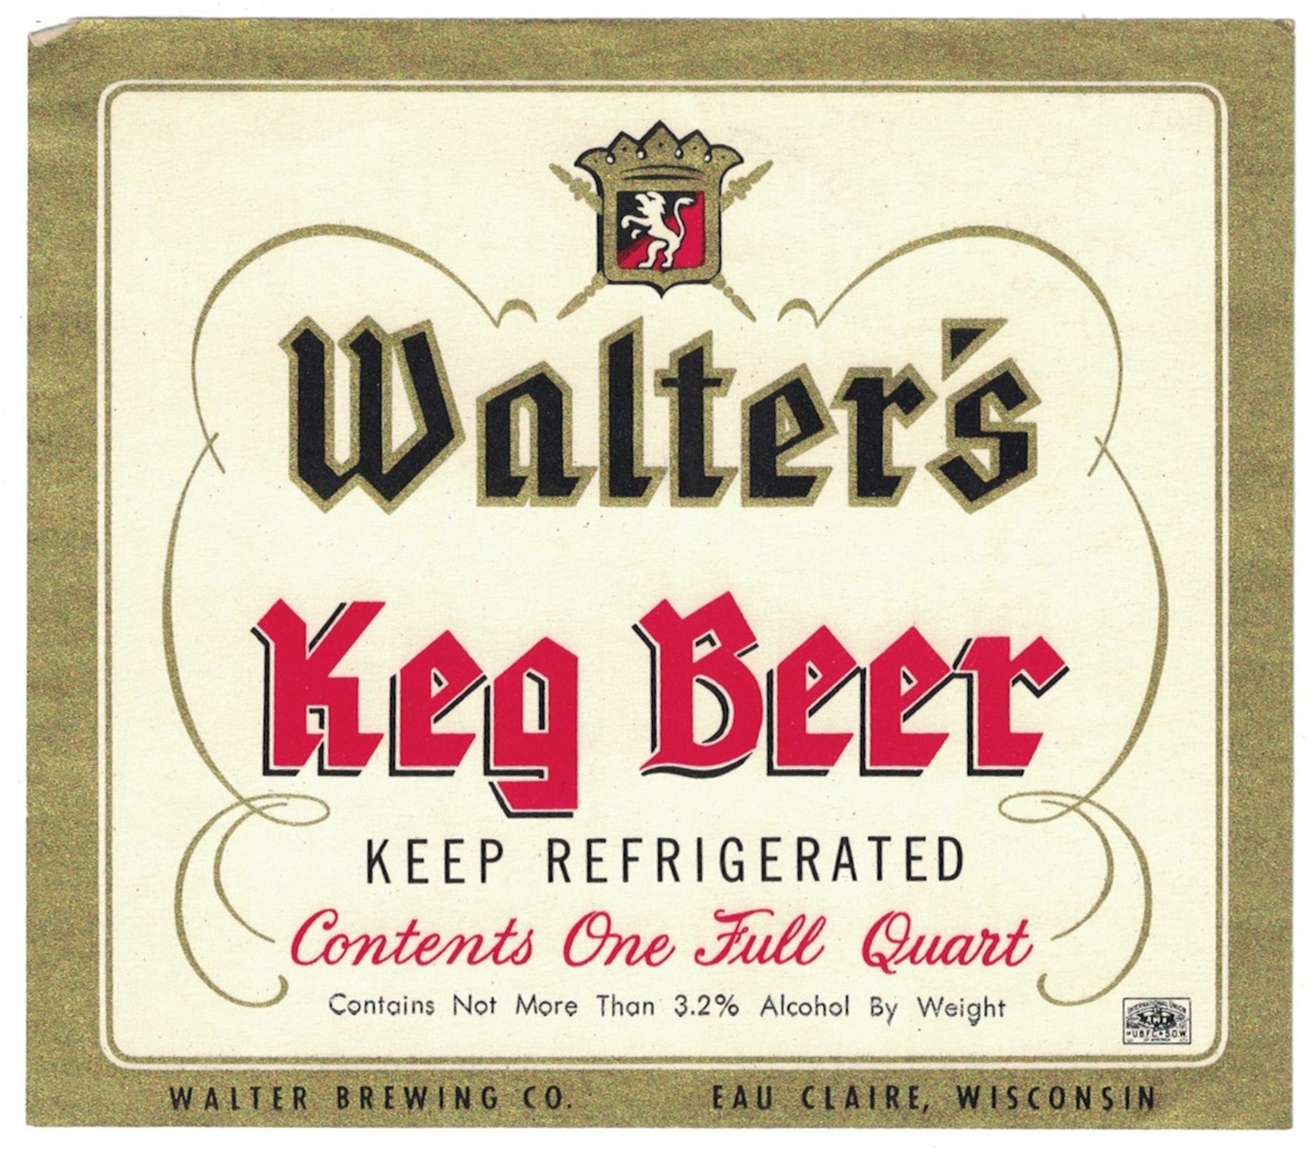 Eau Claire WI 3 diff WALTERS HOLIDAY beer labels